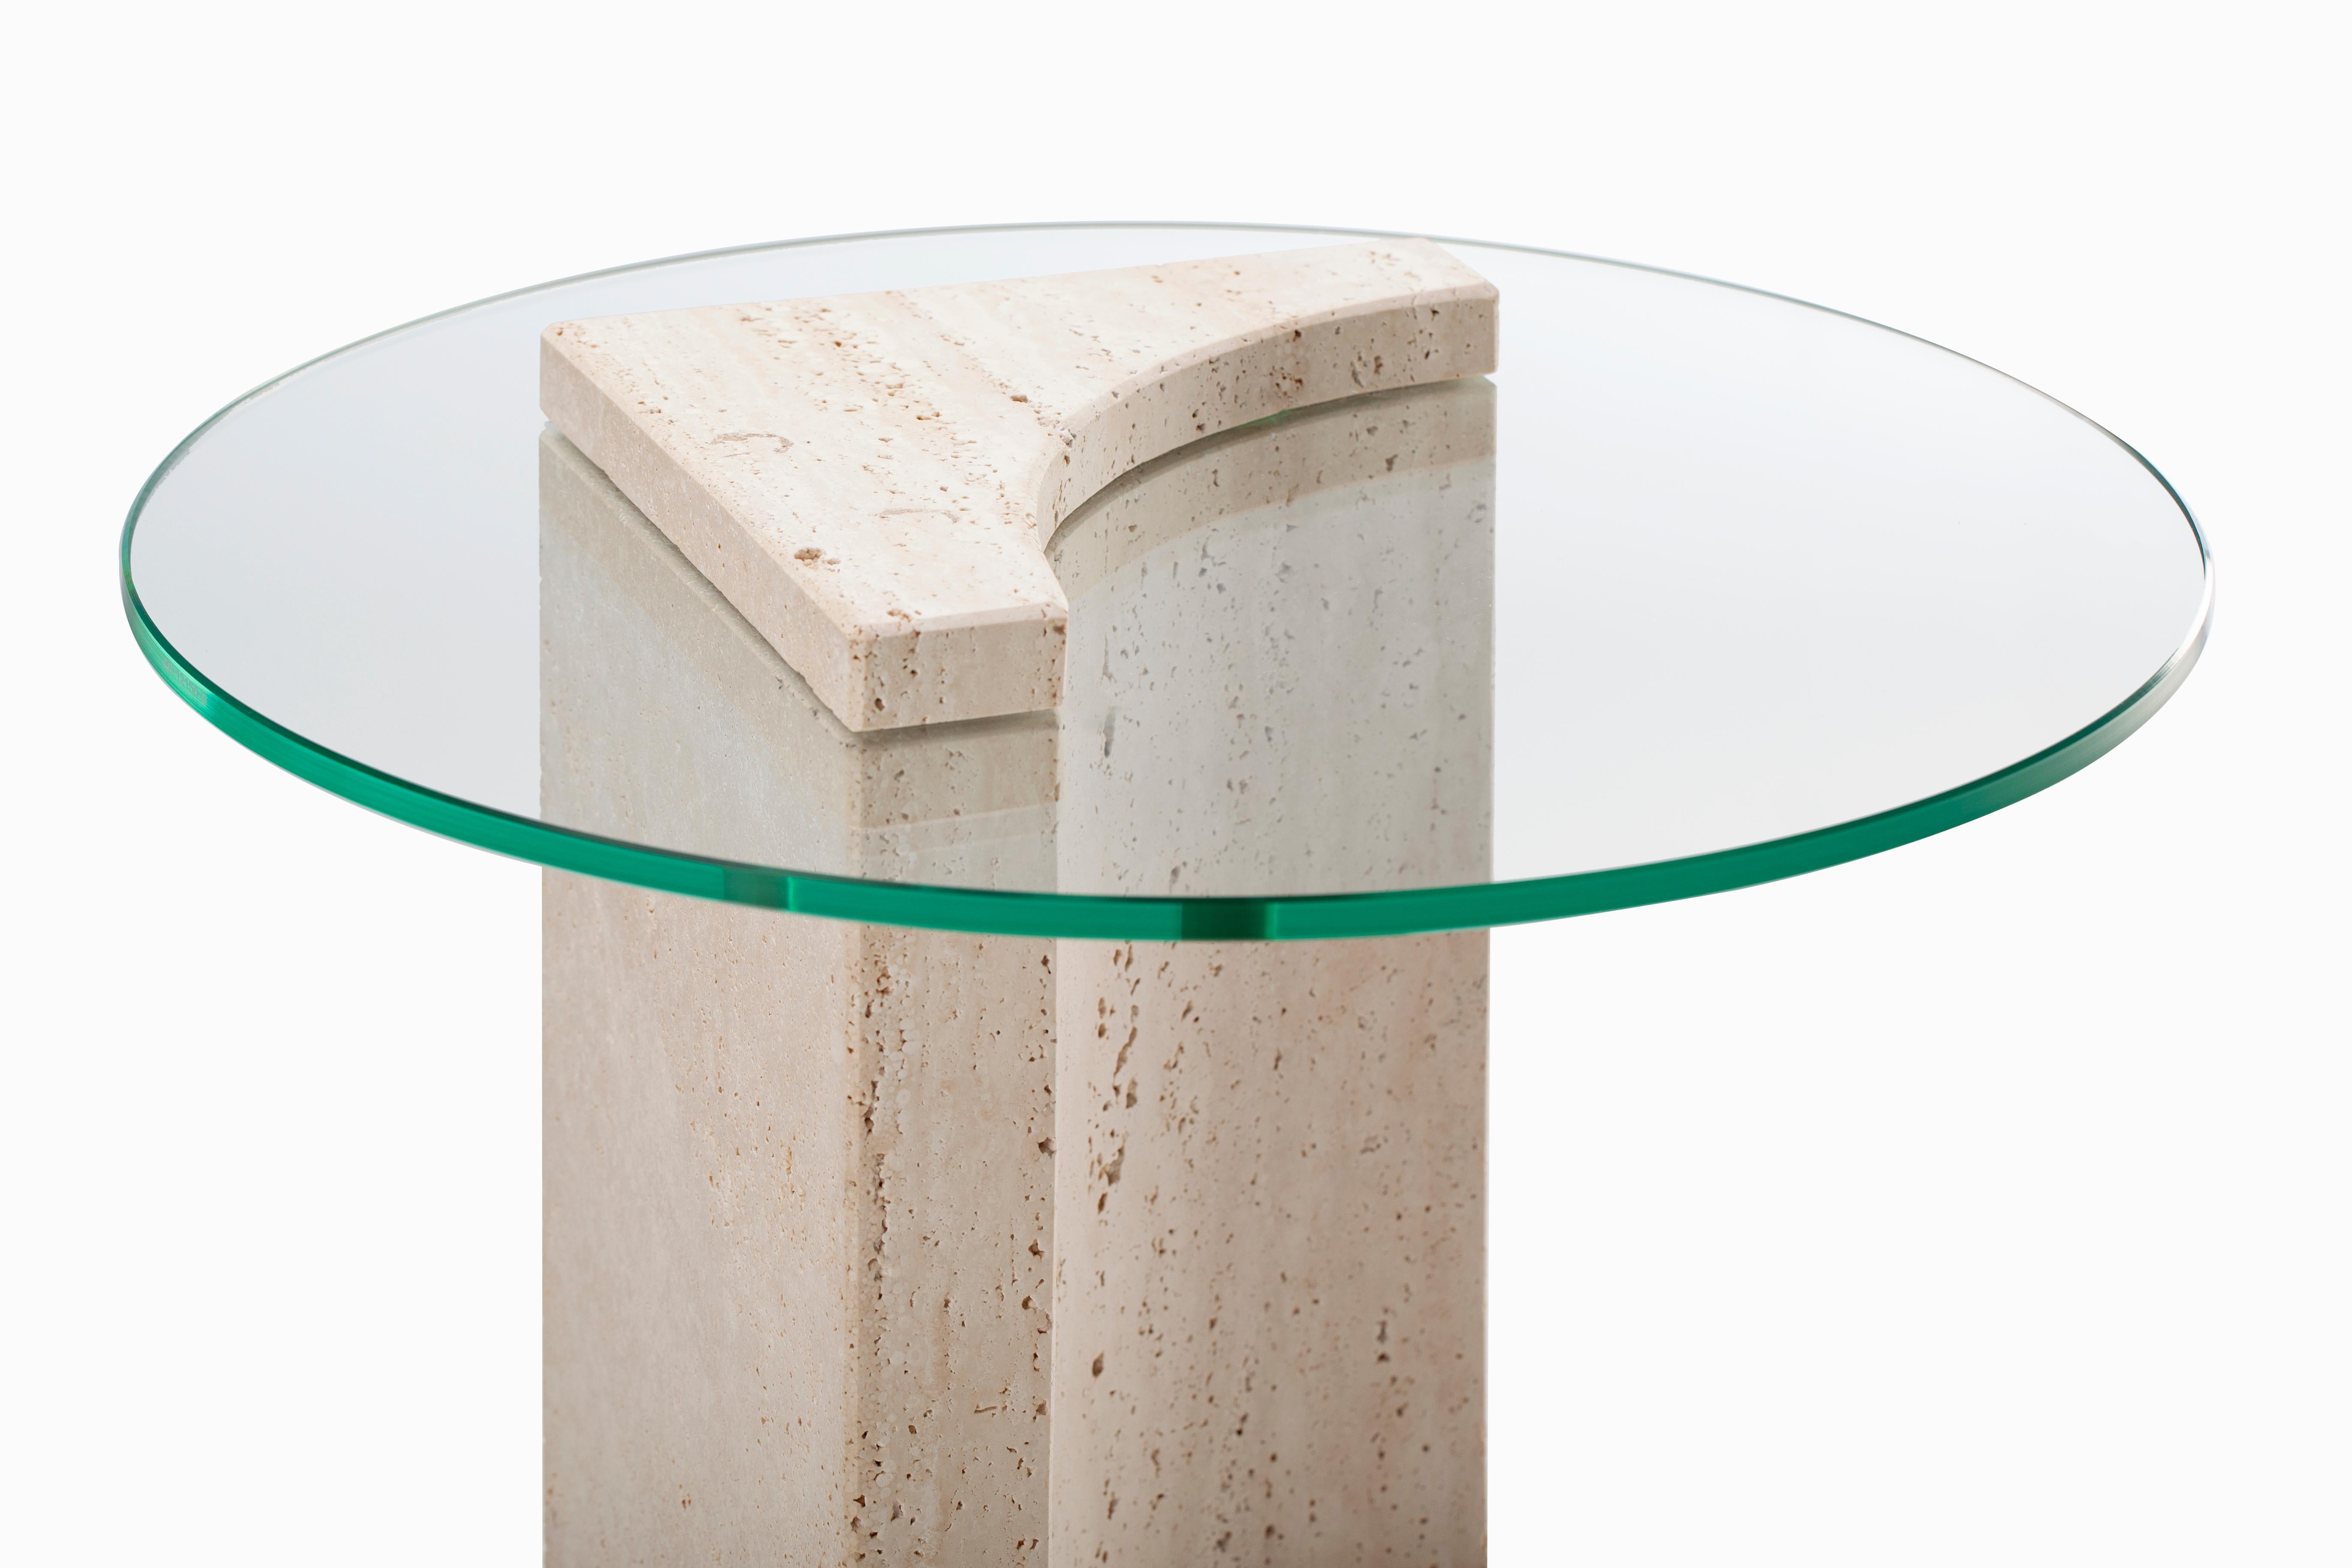 Edge Side Table with Travertino Marble made in Portugal by Collector Studio


TECHNICAL DETAILS
DIMENSIONS:
Ø 50 cm  19,7”
H 50 cm  19,7”

PRODUCT FEATURES
Table top in glass or cast glass.
Leg in travertino.
PRODUCT OPTIONS
GLASS